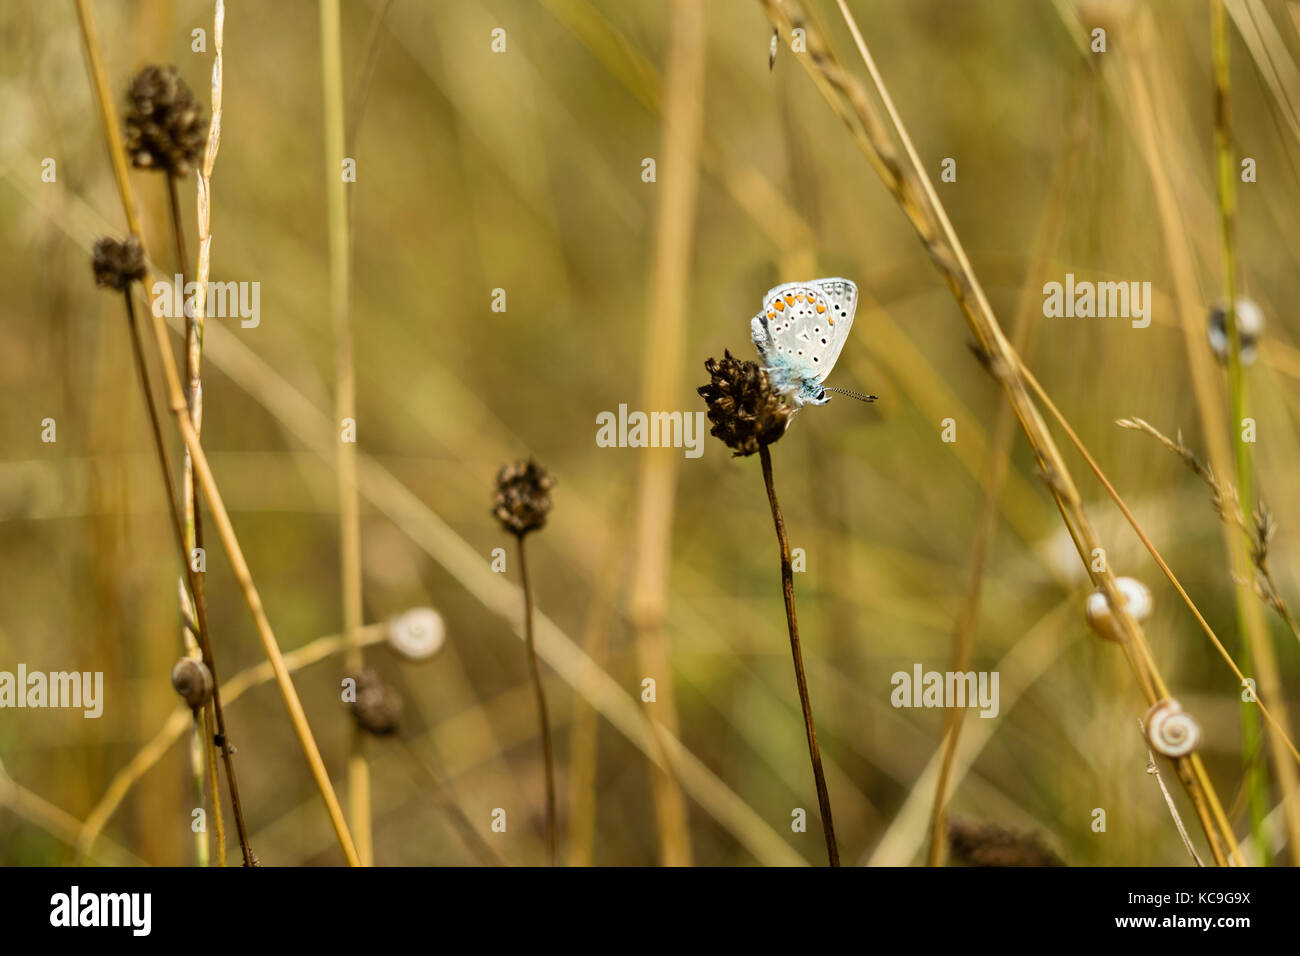 Close-Up Of Intricate Zephyr Blue Butterfly Or Plebejus Pylaon Perched On Dried Plant Surrounded By Wheat Grass And Snails Stock Photo